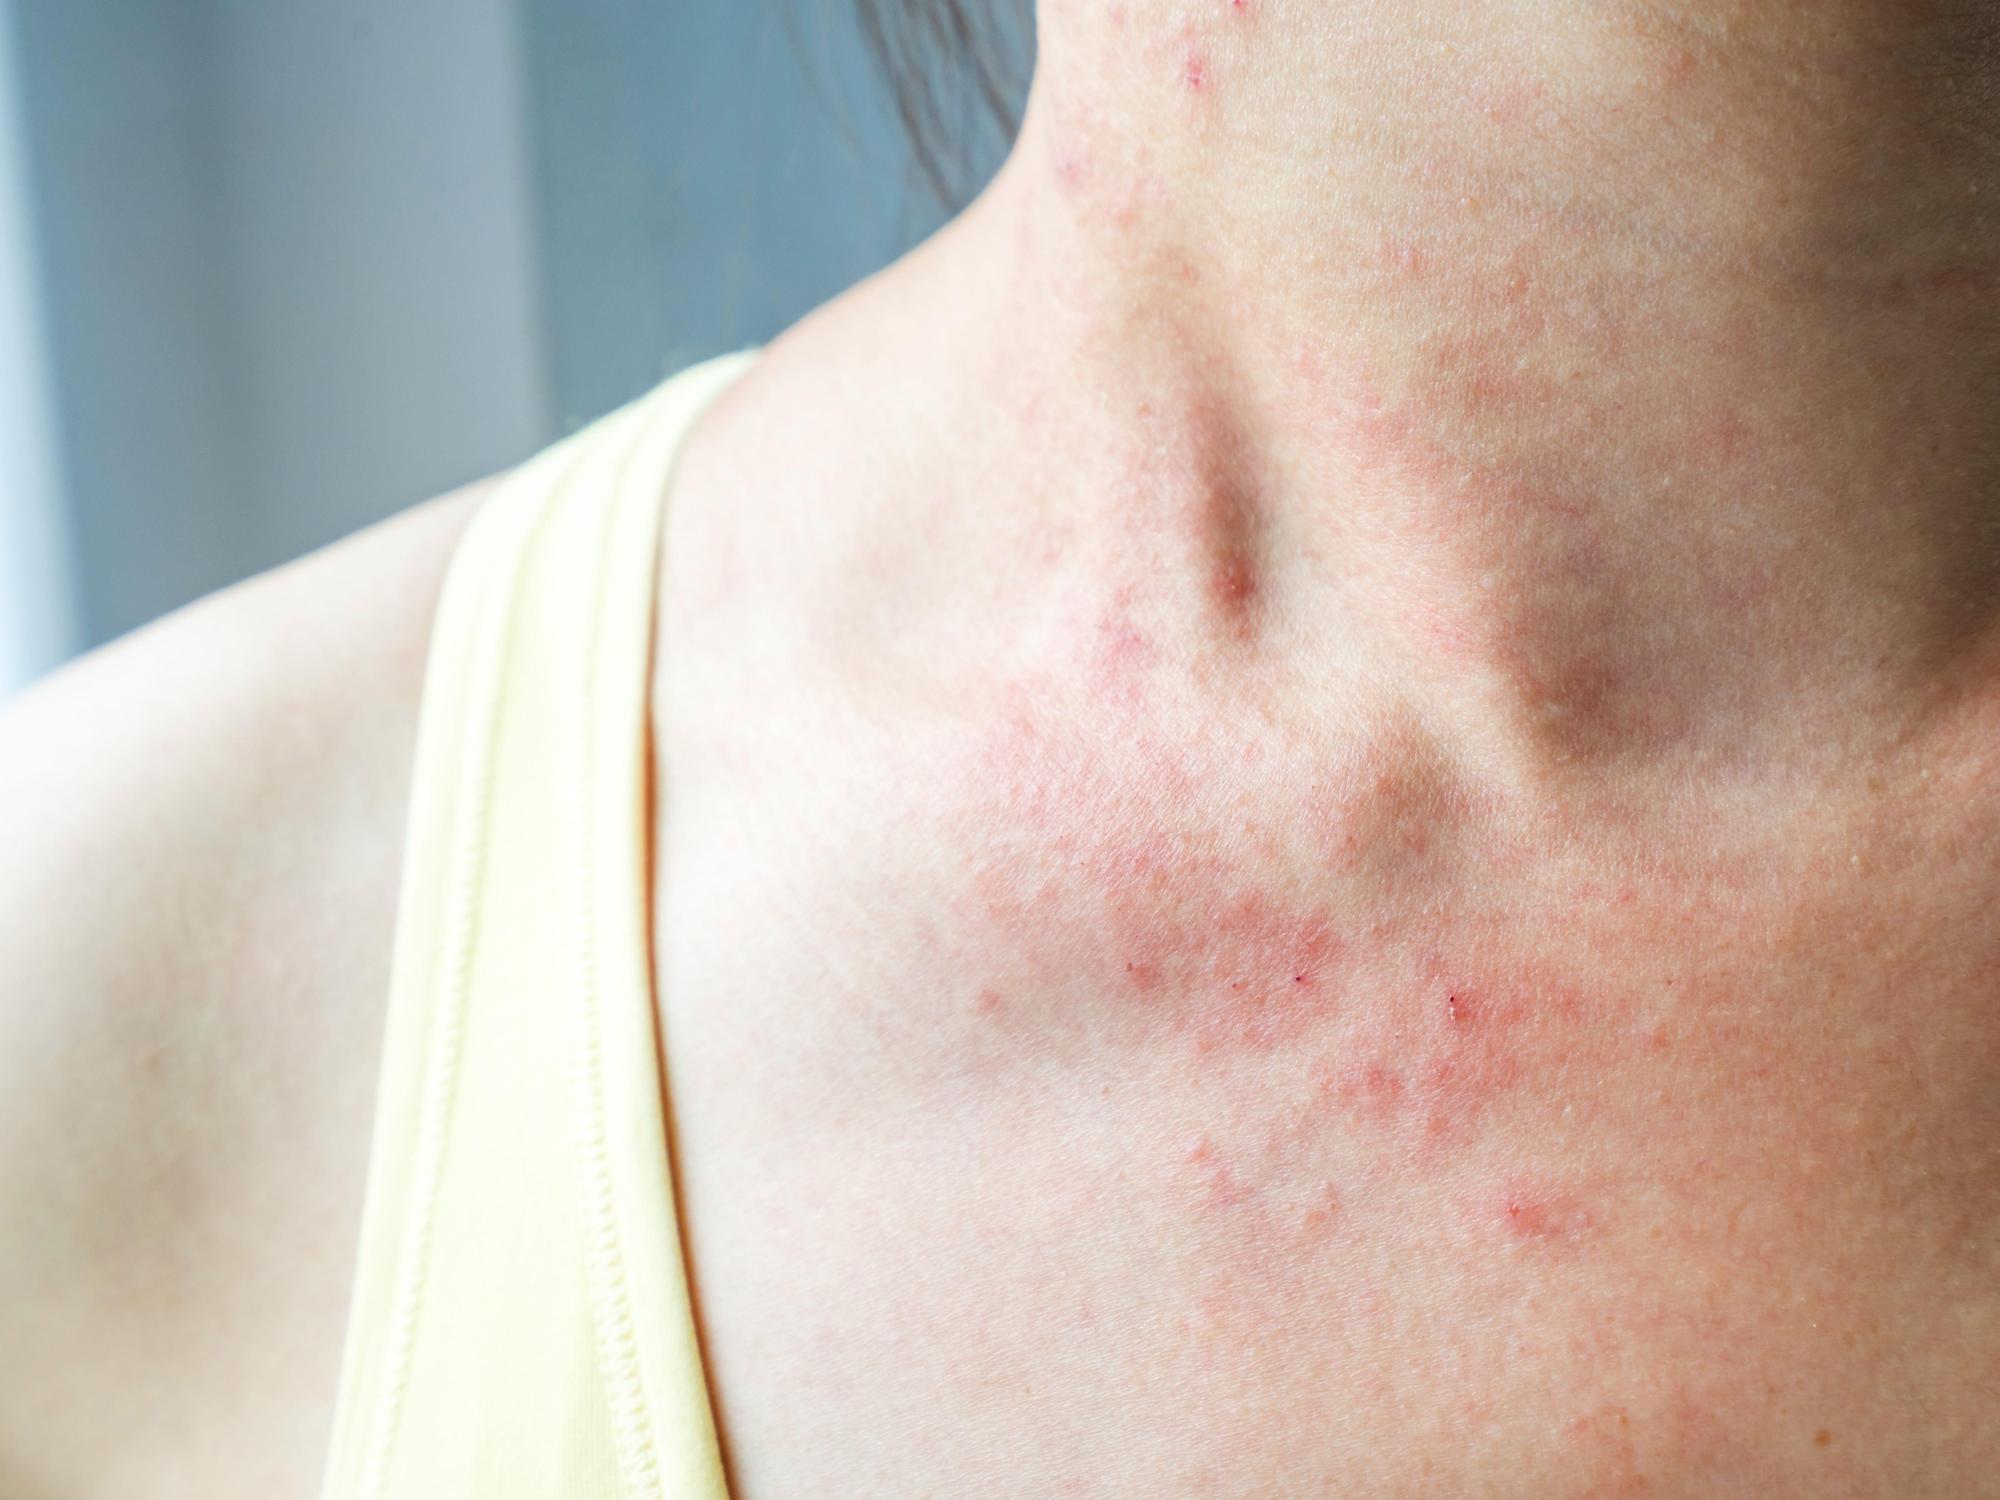 6 simple tips to prevent eczema flare